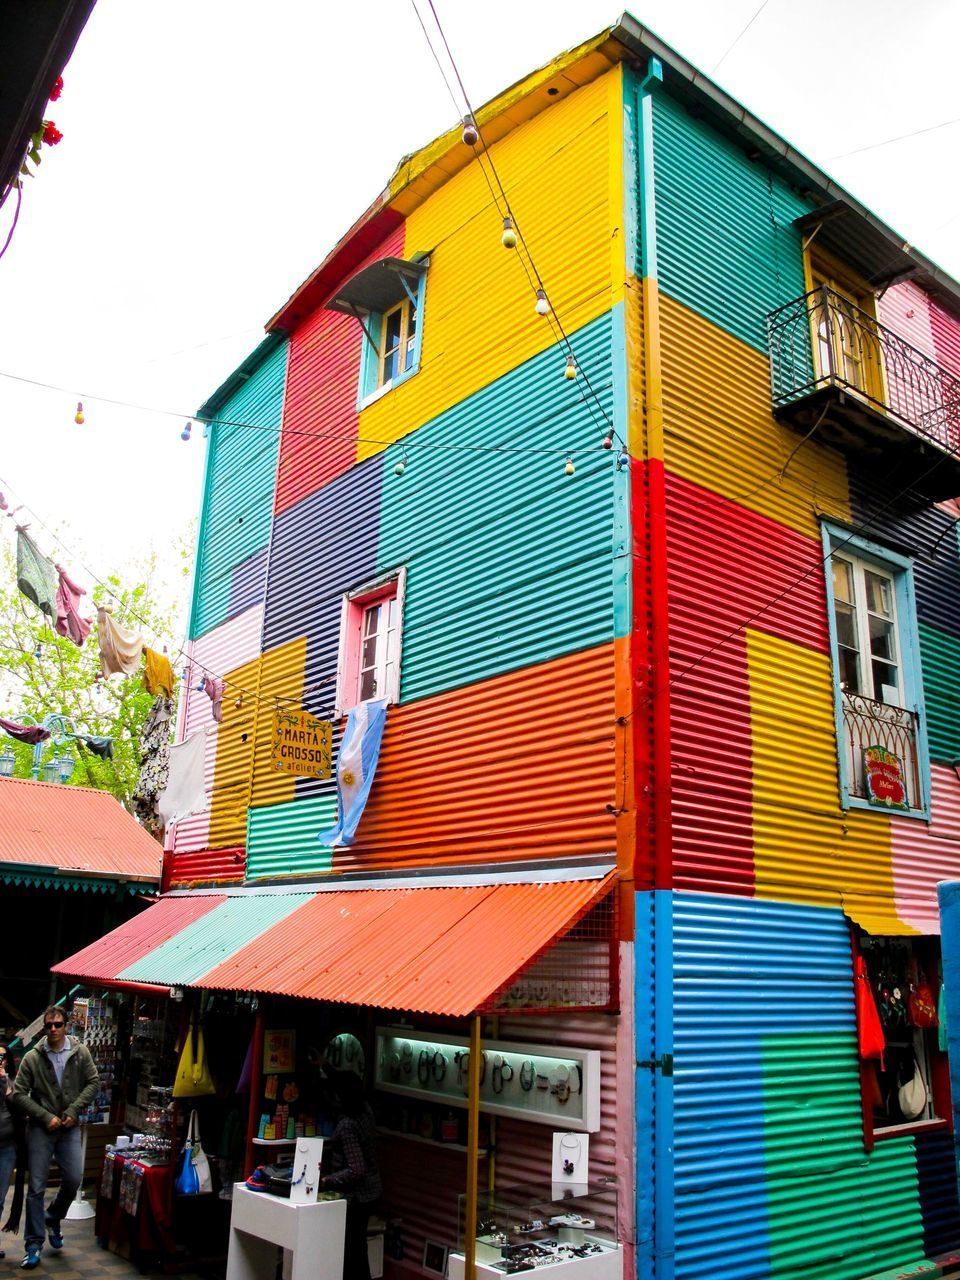 LOW ANGLE VIEW OF MULTI COLORED BUILDINGS IN HOUSE